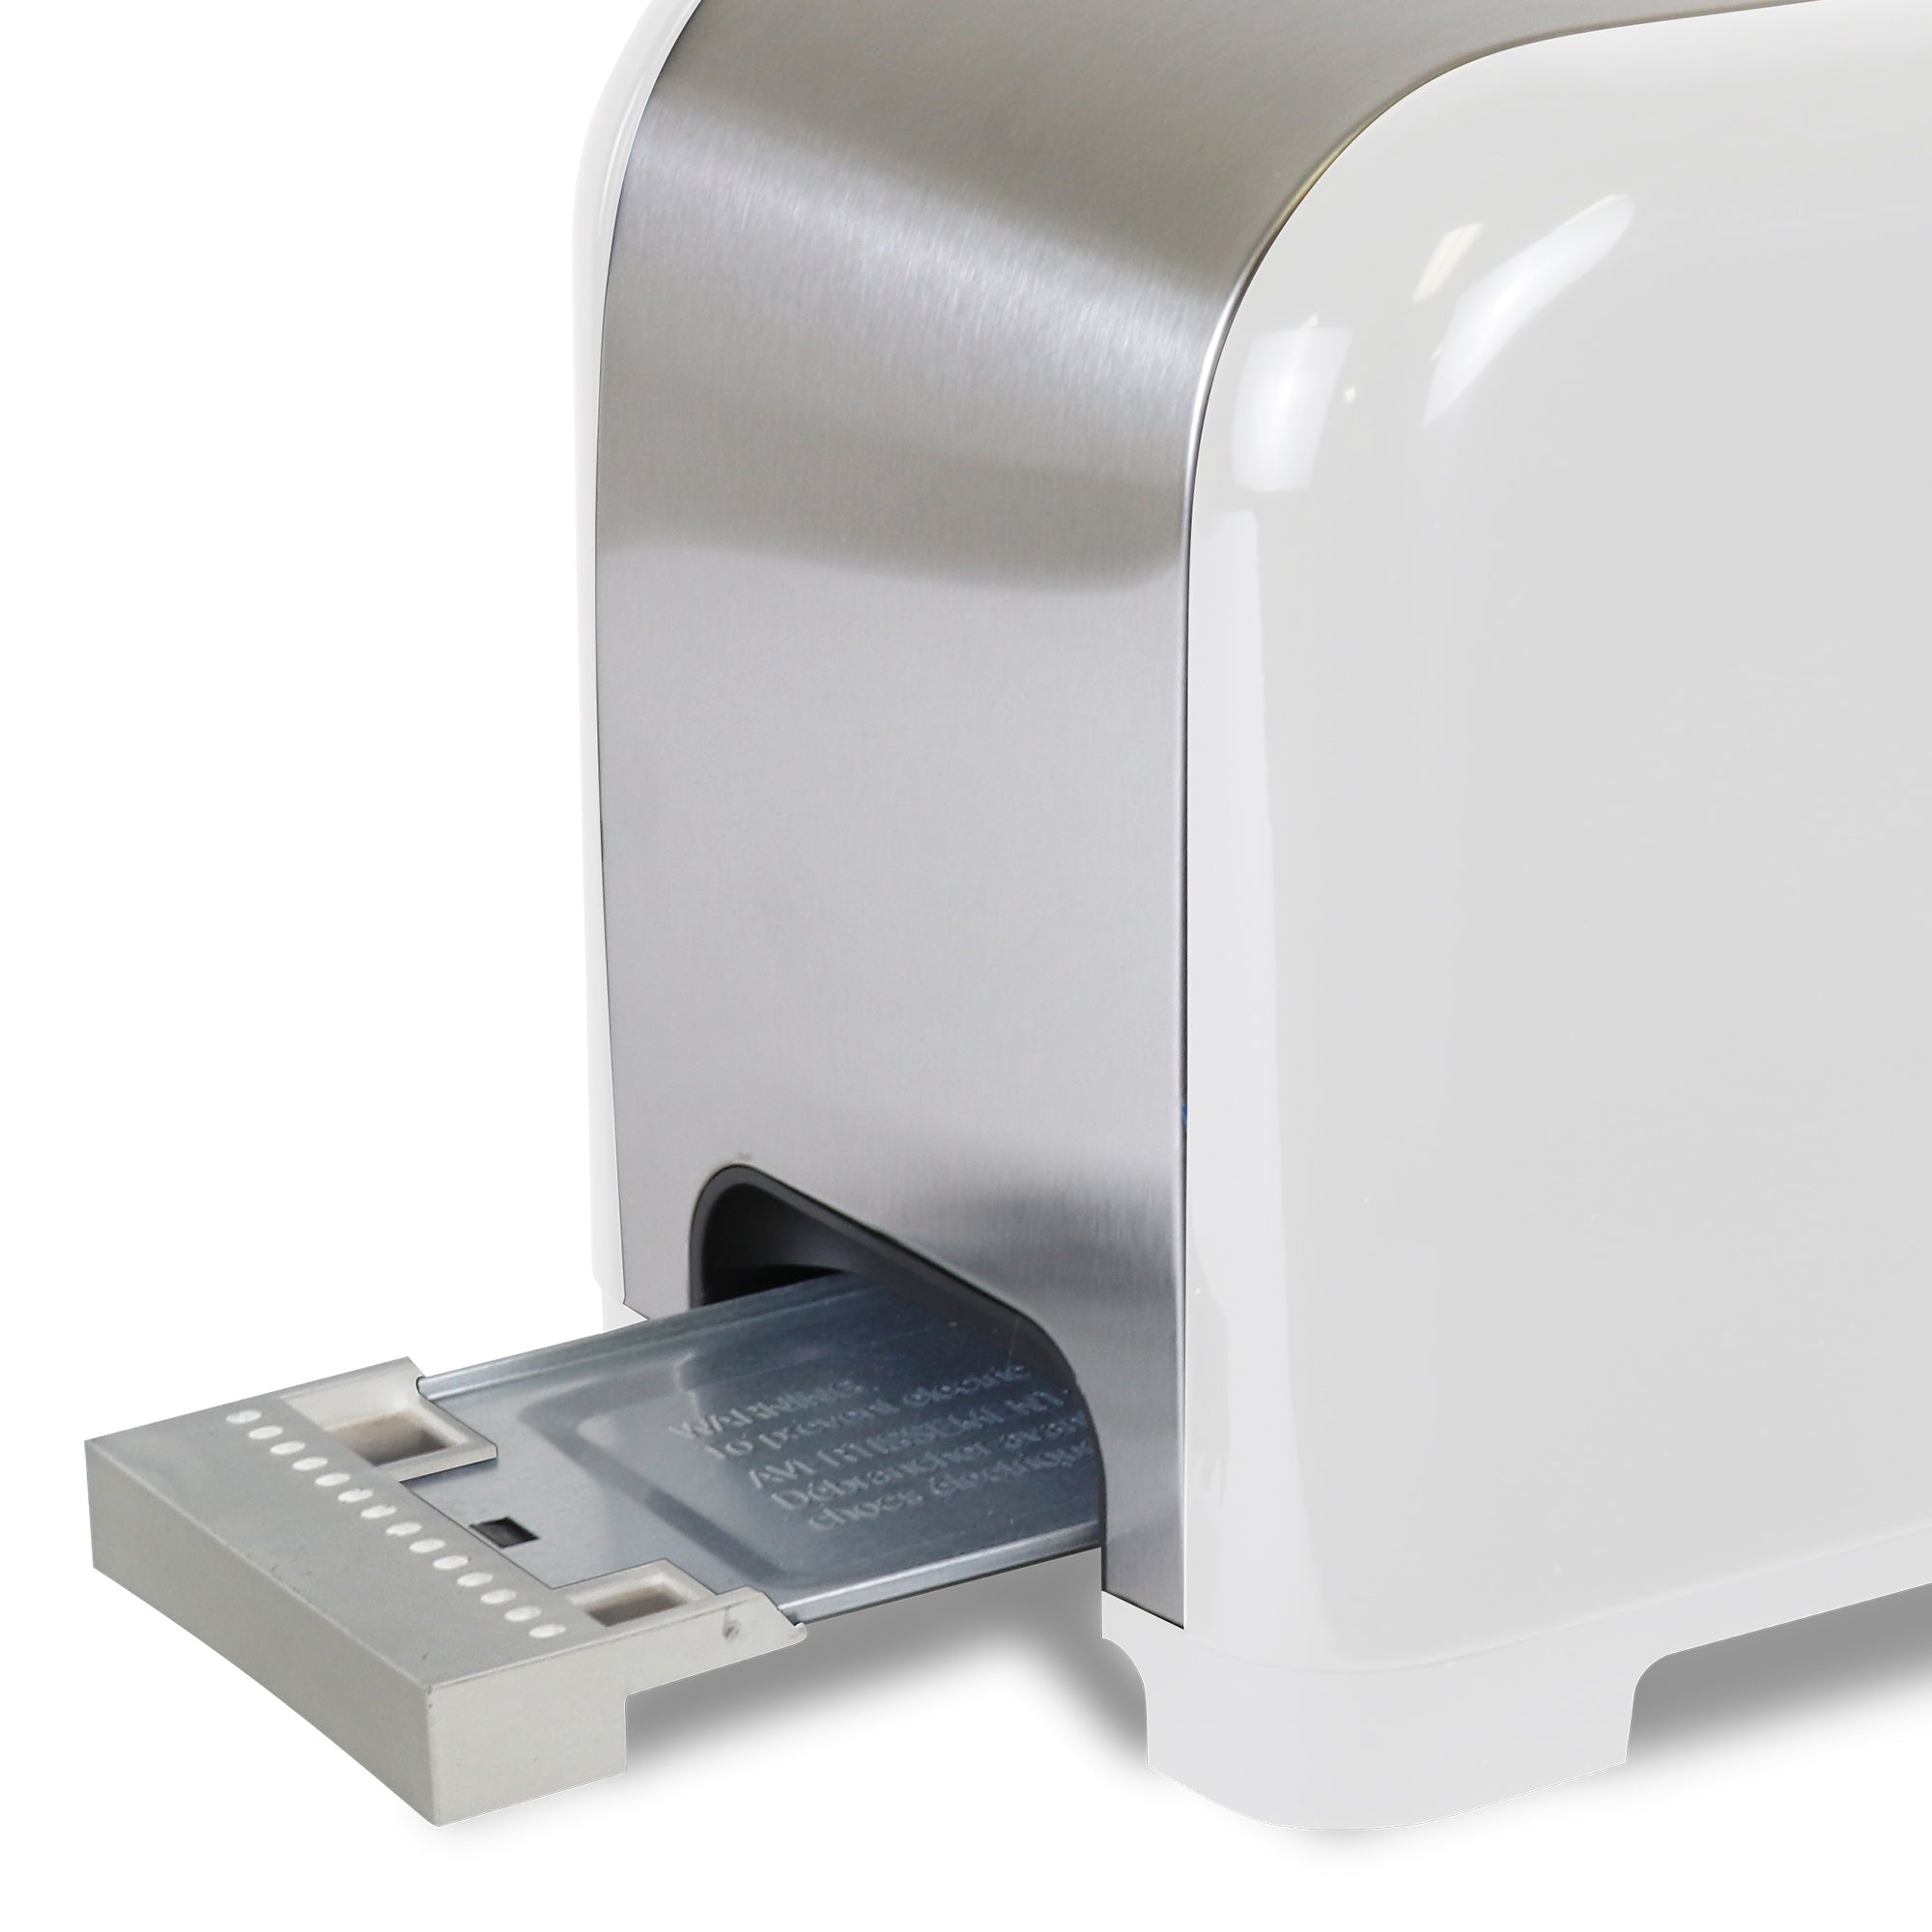 Kenmore 2-slice stainless steel toaster on a white background with dimensions labeled